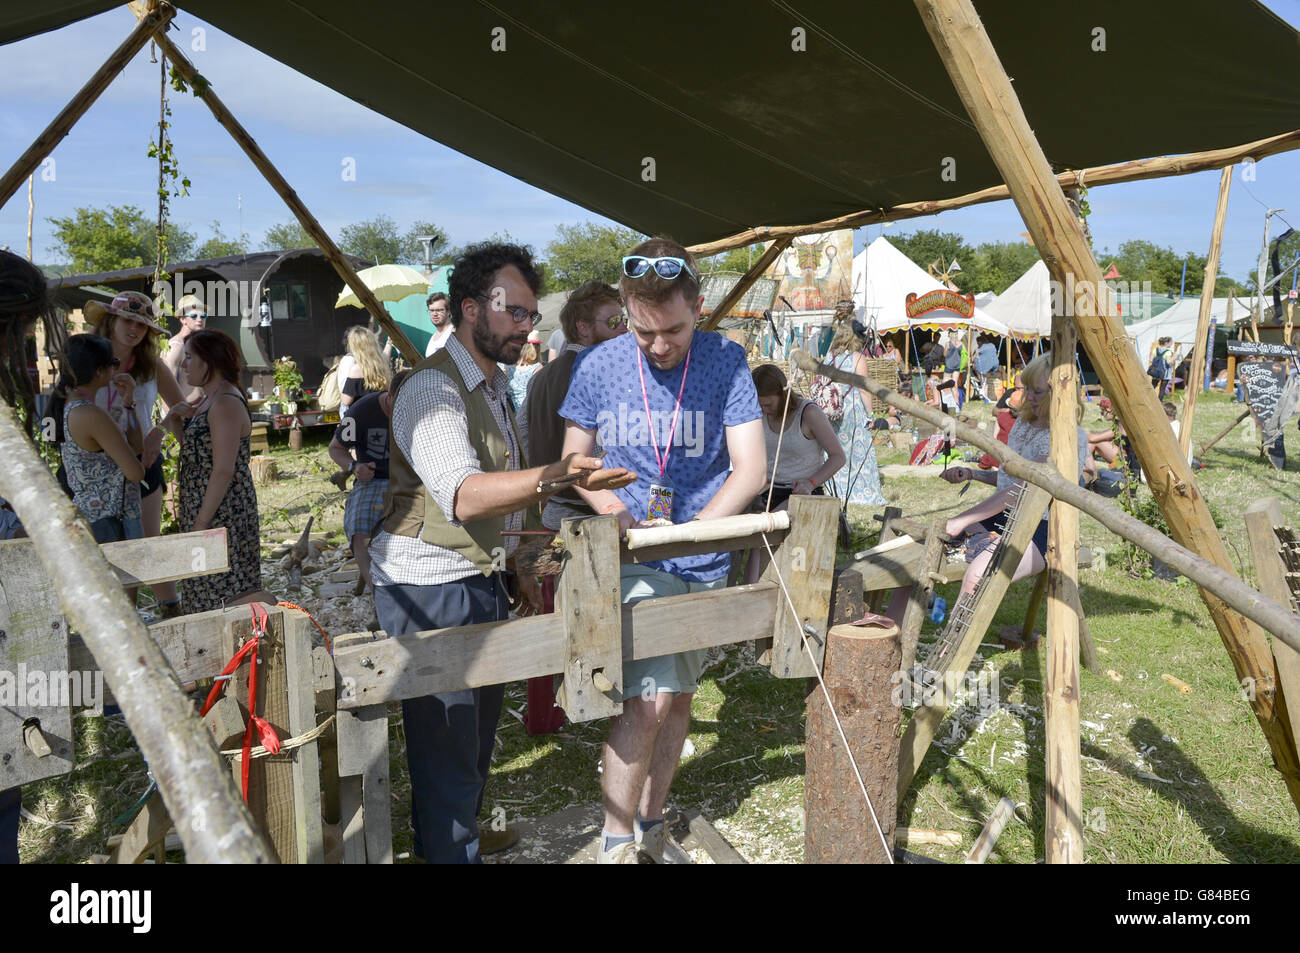 People do woodworking classes in the craft fields at Glastonbury Festival. PRESS ASSOCIATION Photo. Picture date: Thursday June, 25, 2015. Photo credit should read: Ben Birchall/PA Wire Stock Photo